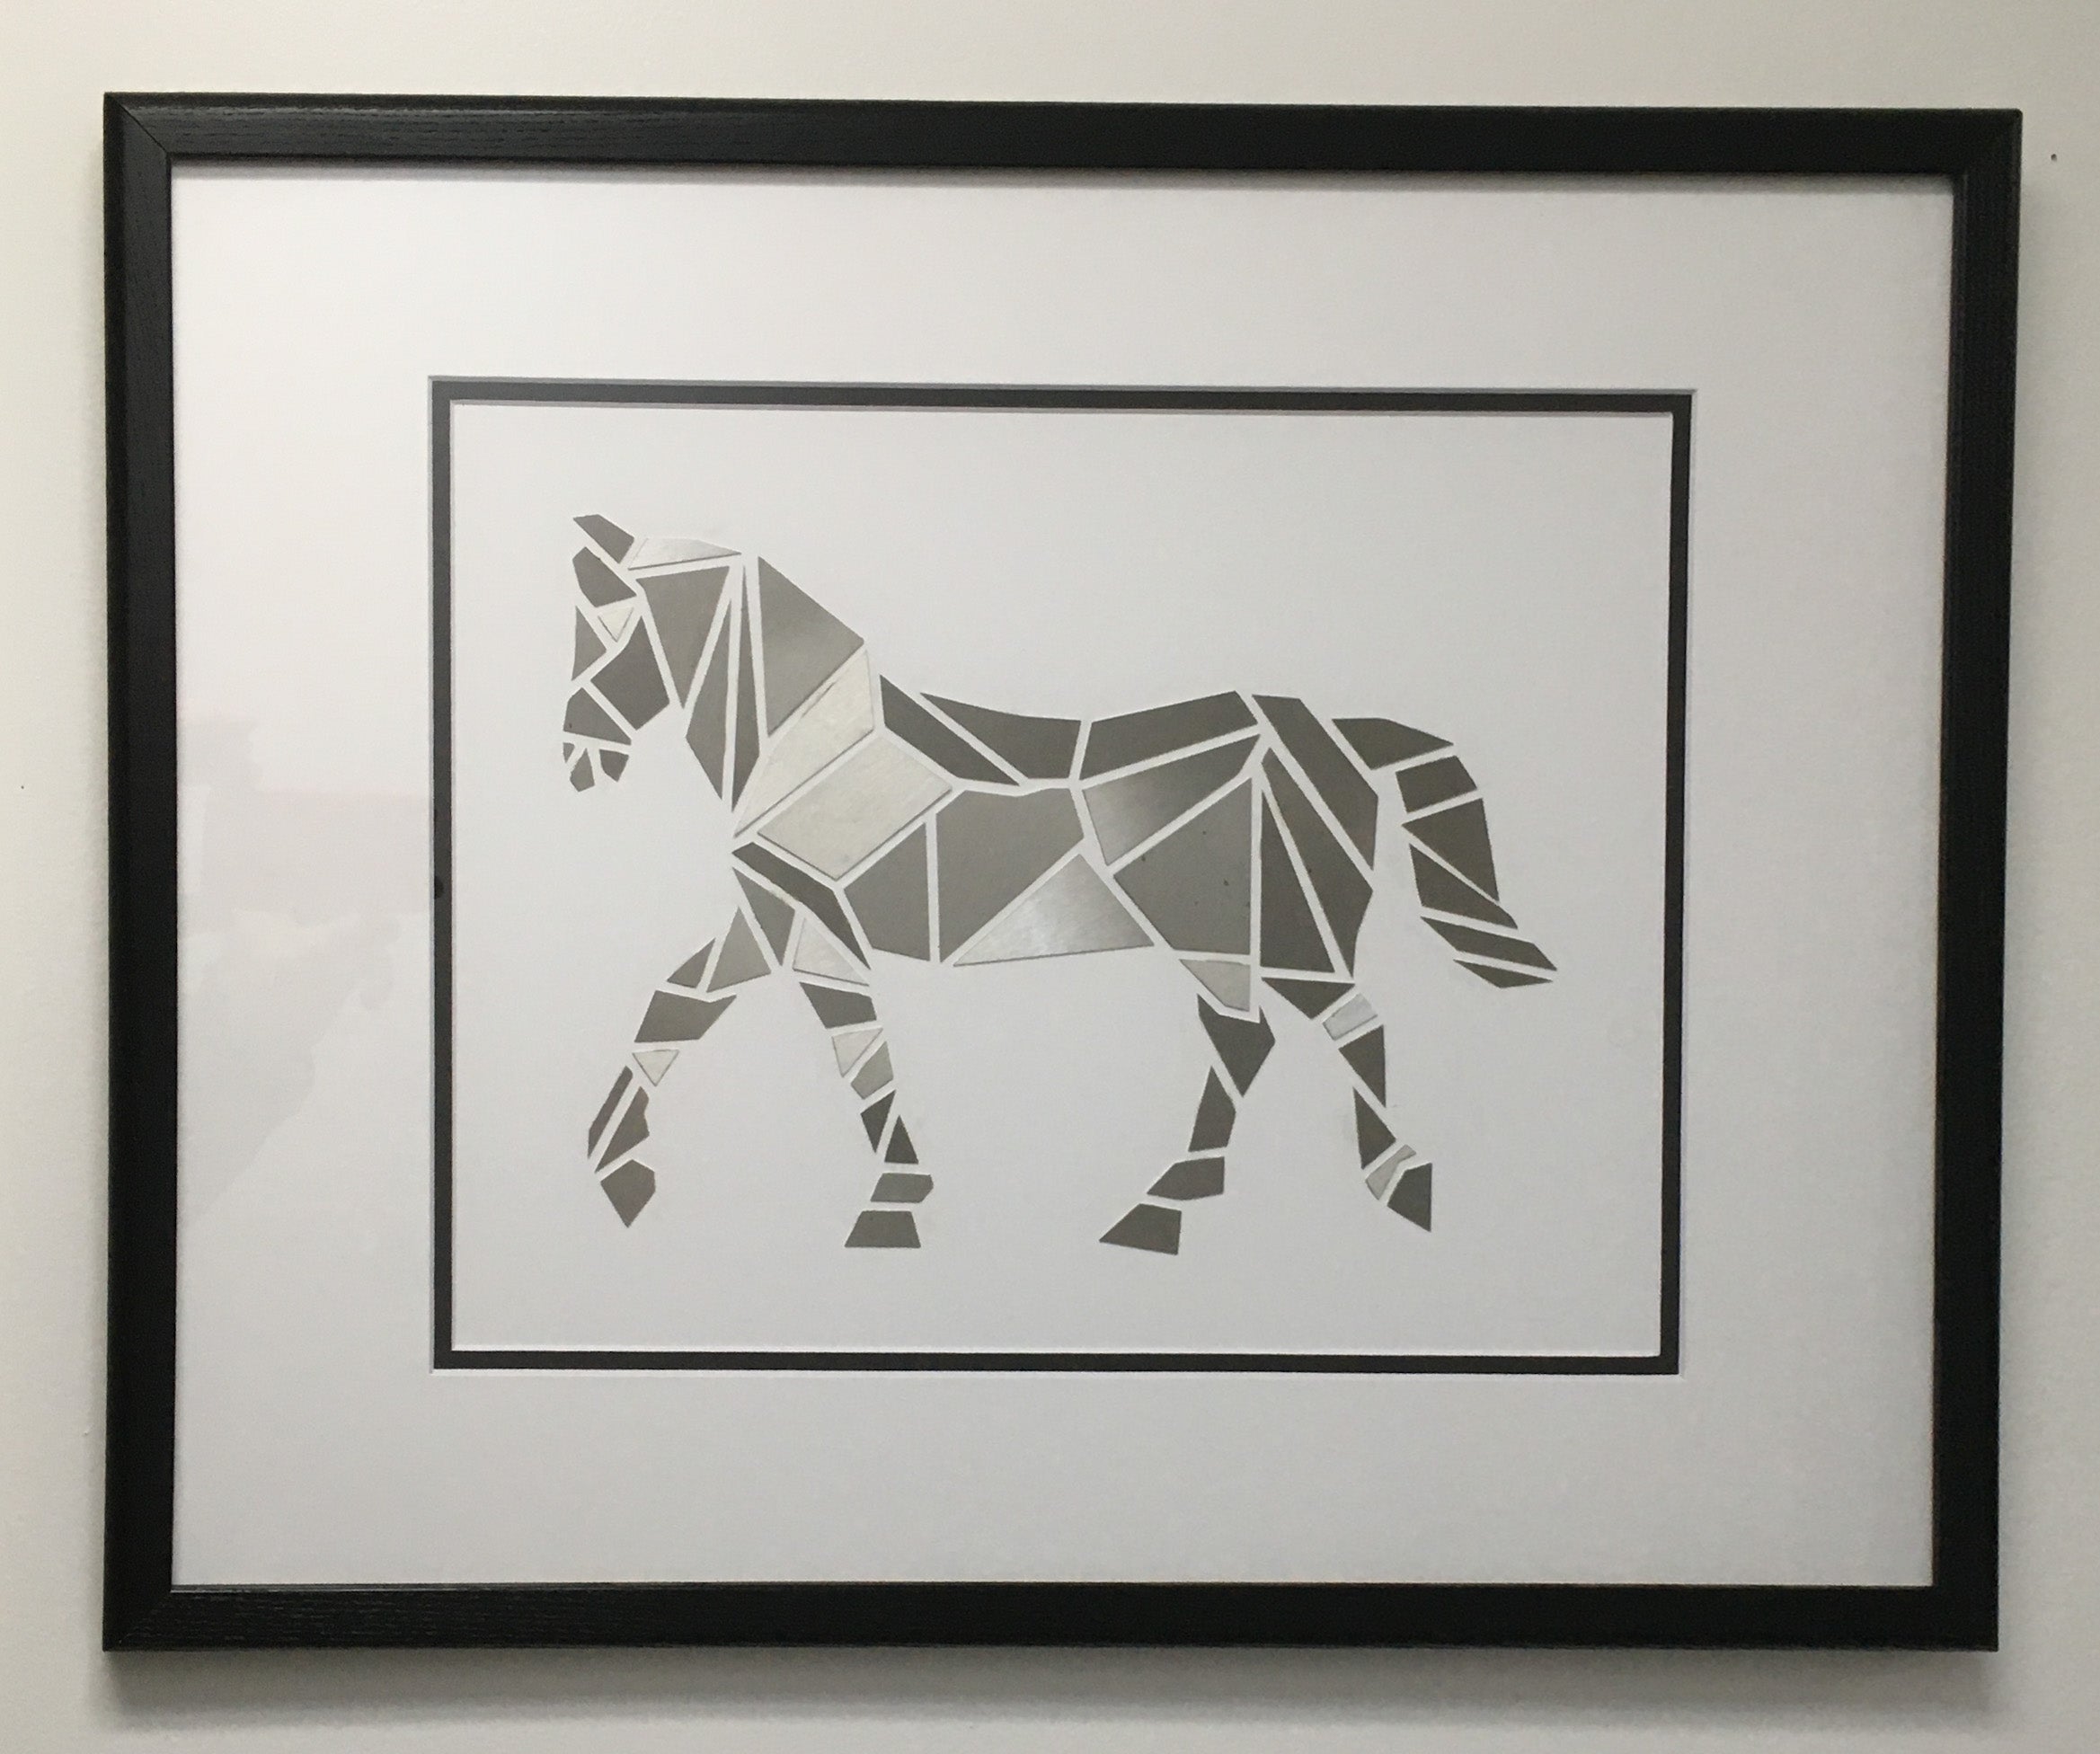 Modern Geometric Polygonal Stainless Steel Silhouette Artwork of a Horse Glass Framed in a 16 x 20 Wooden Frame